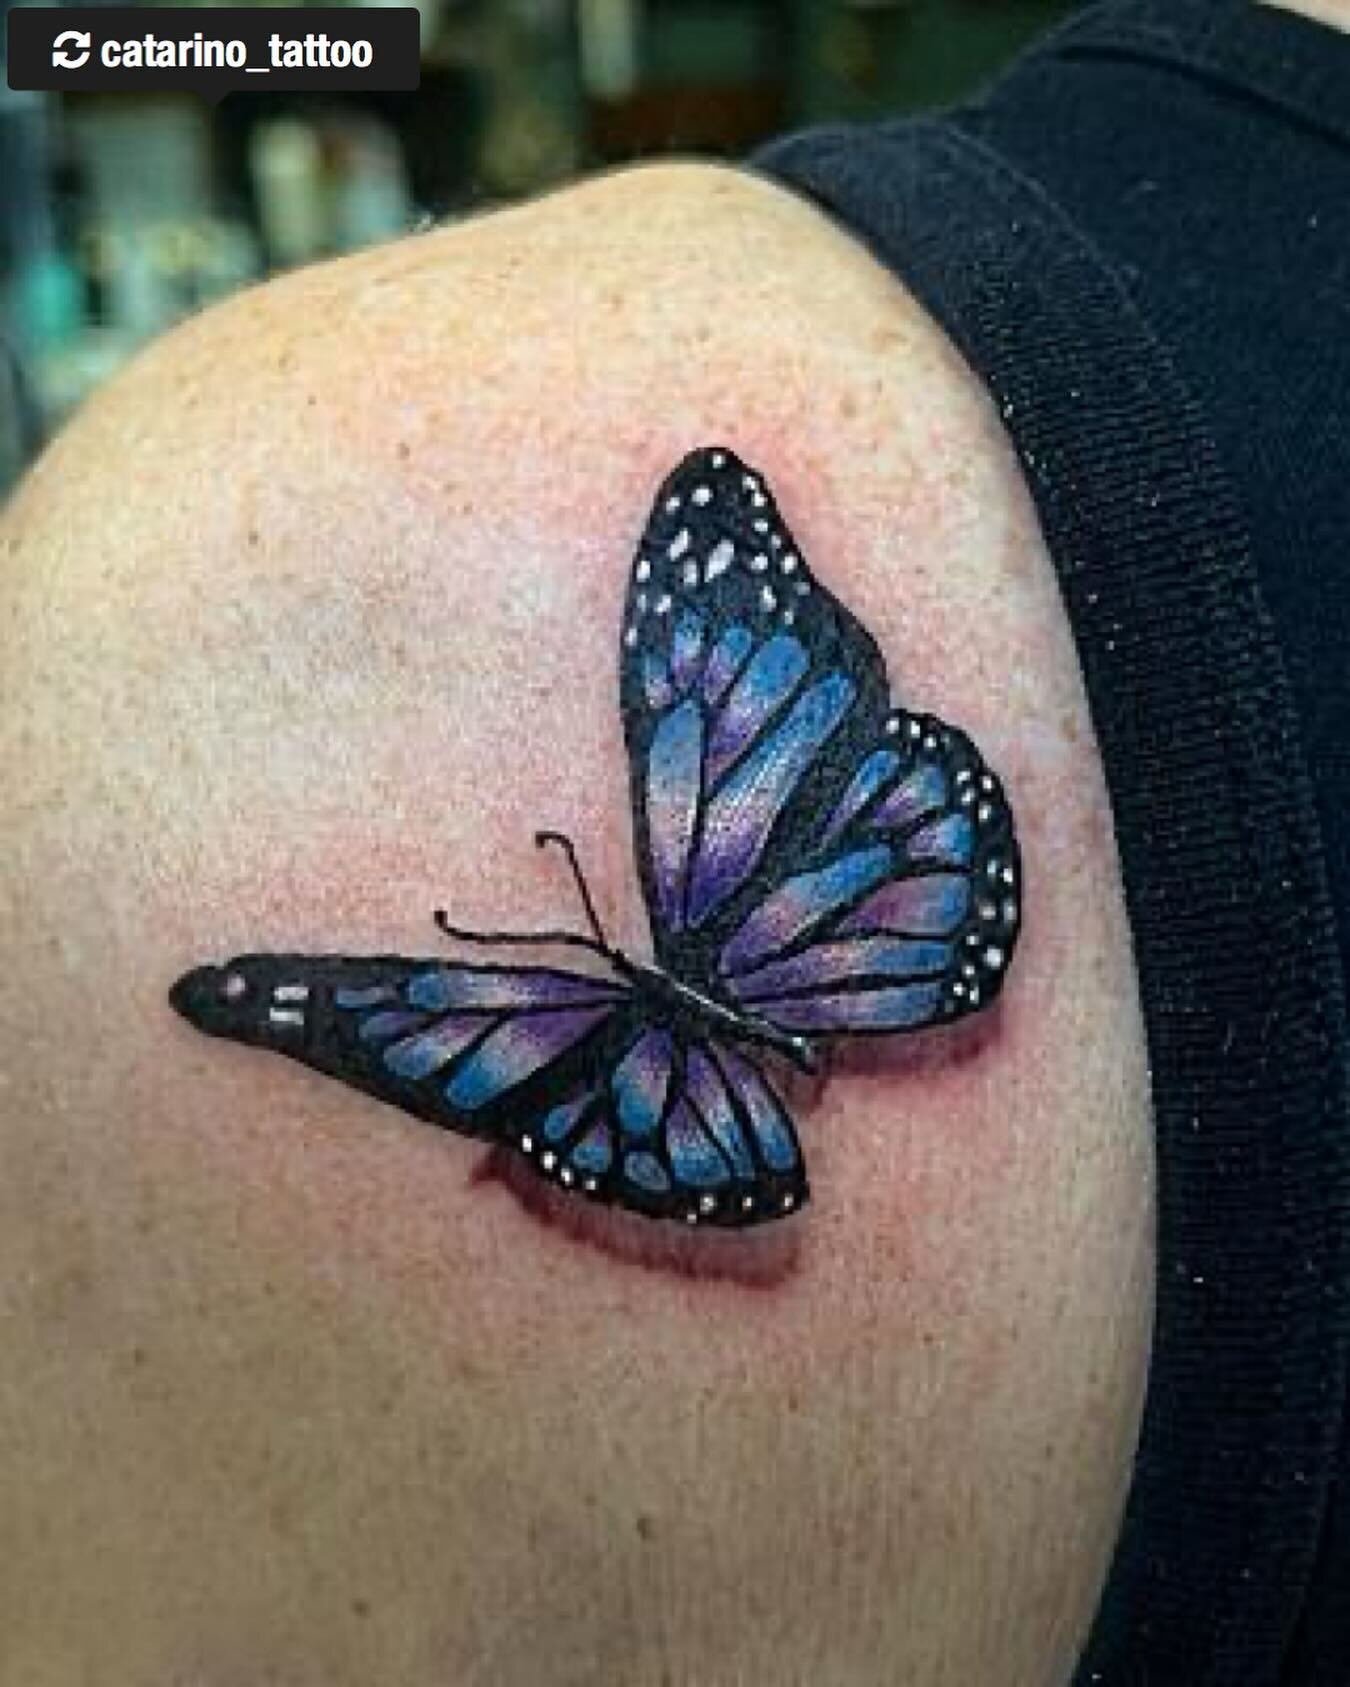 Tomorrow is our first walk in Friday! Catarino and @chloeanne_art will be taking small tattoos on a first come first served basis from 12-7. See you then! 
&mdash;-
Butterfly by @catarino_tattoo